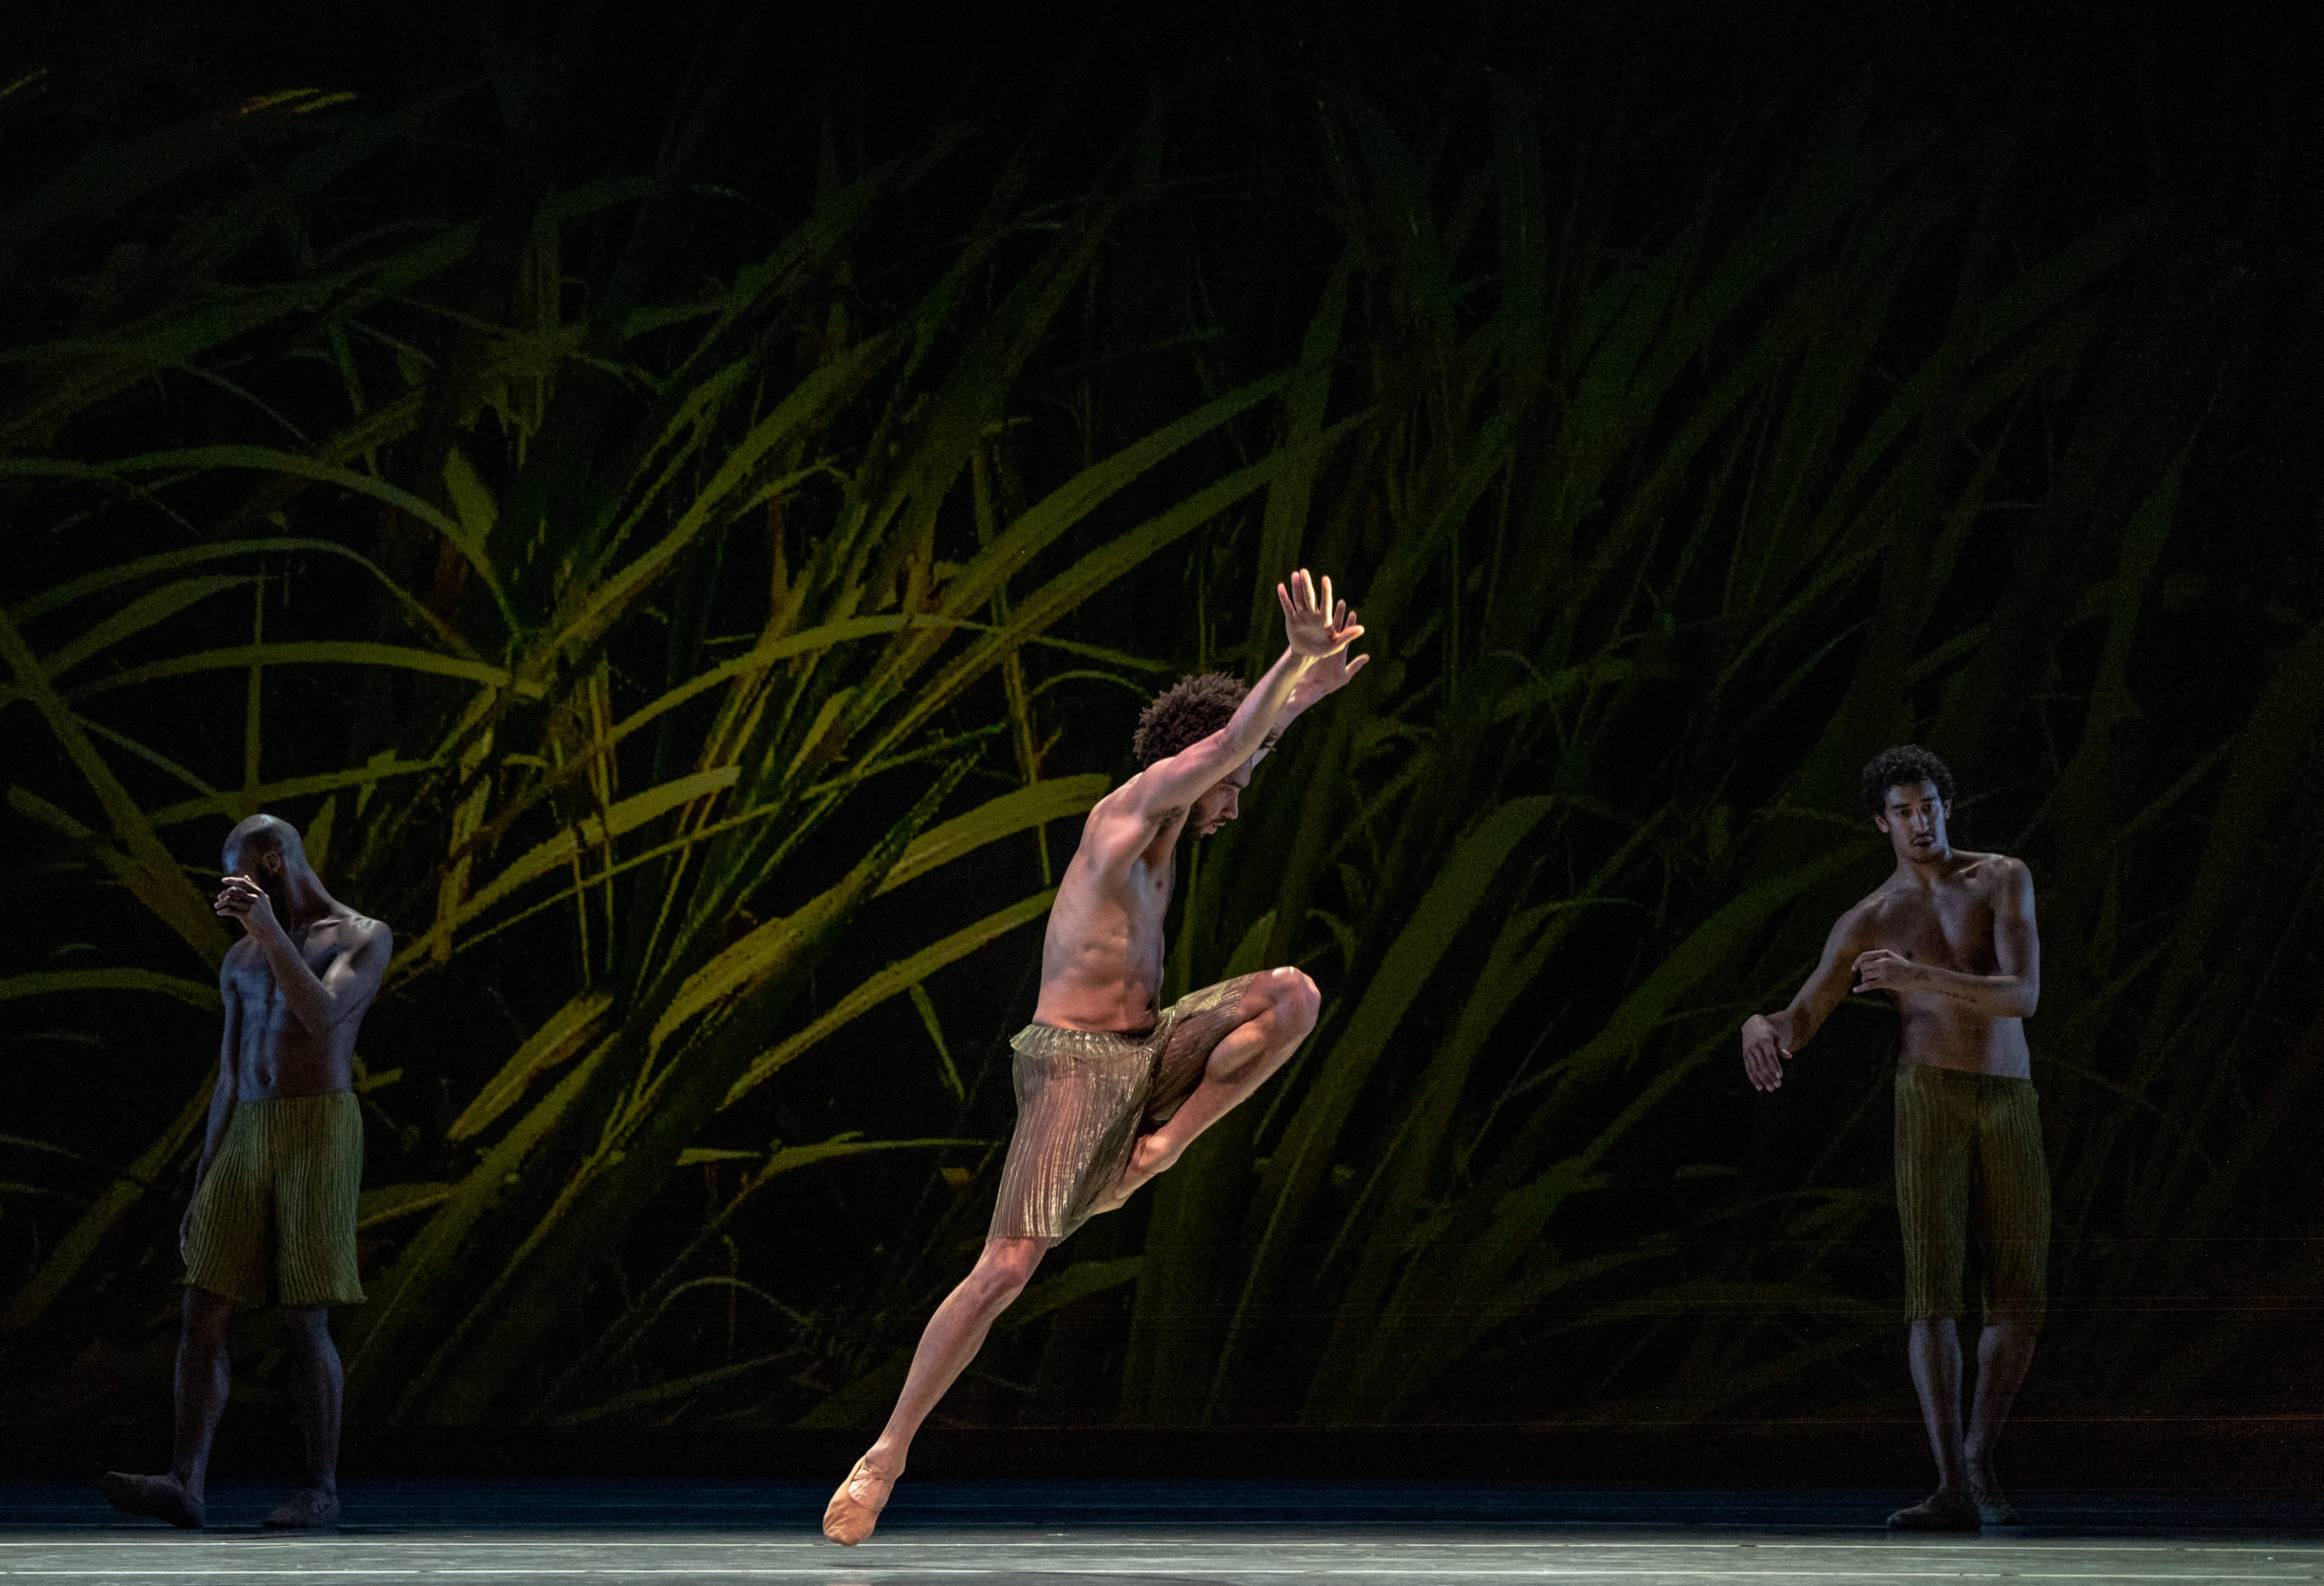 LINES Ballet company artists Babatunji Johnson, Shauib Elhassan, and Michael Montgomery performing on stage in Alonzo King's POLE STAR